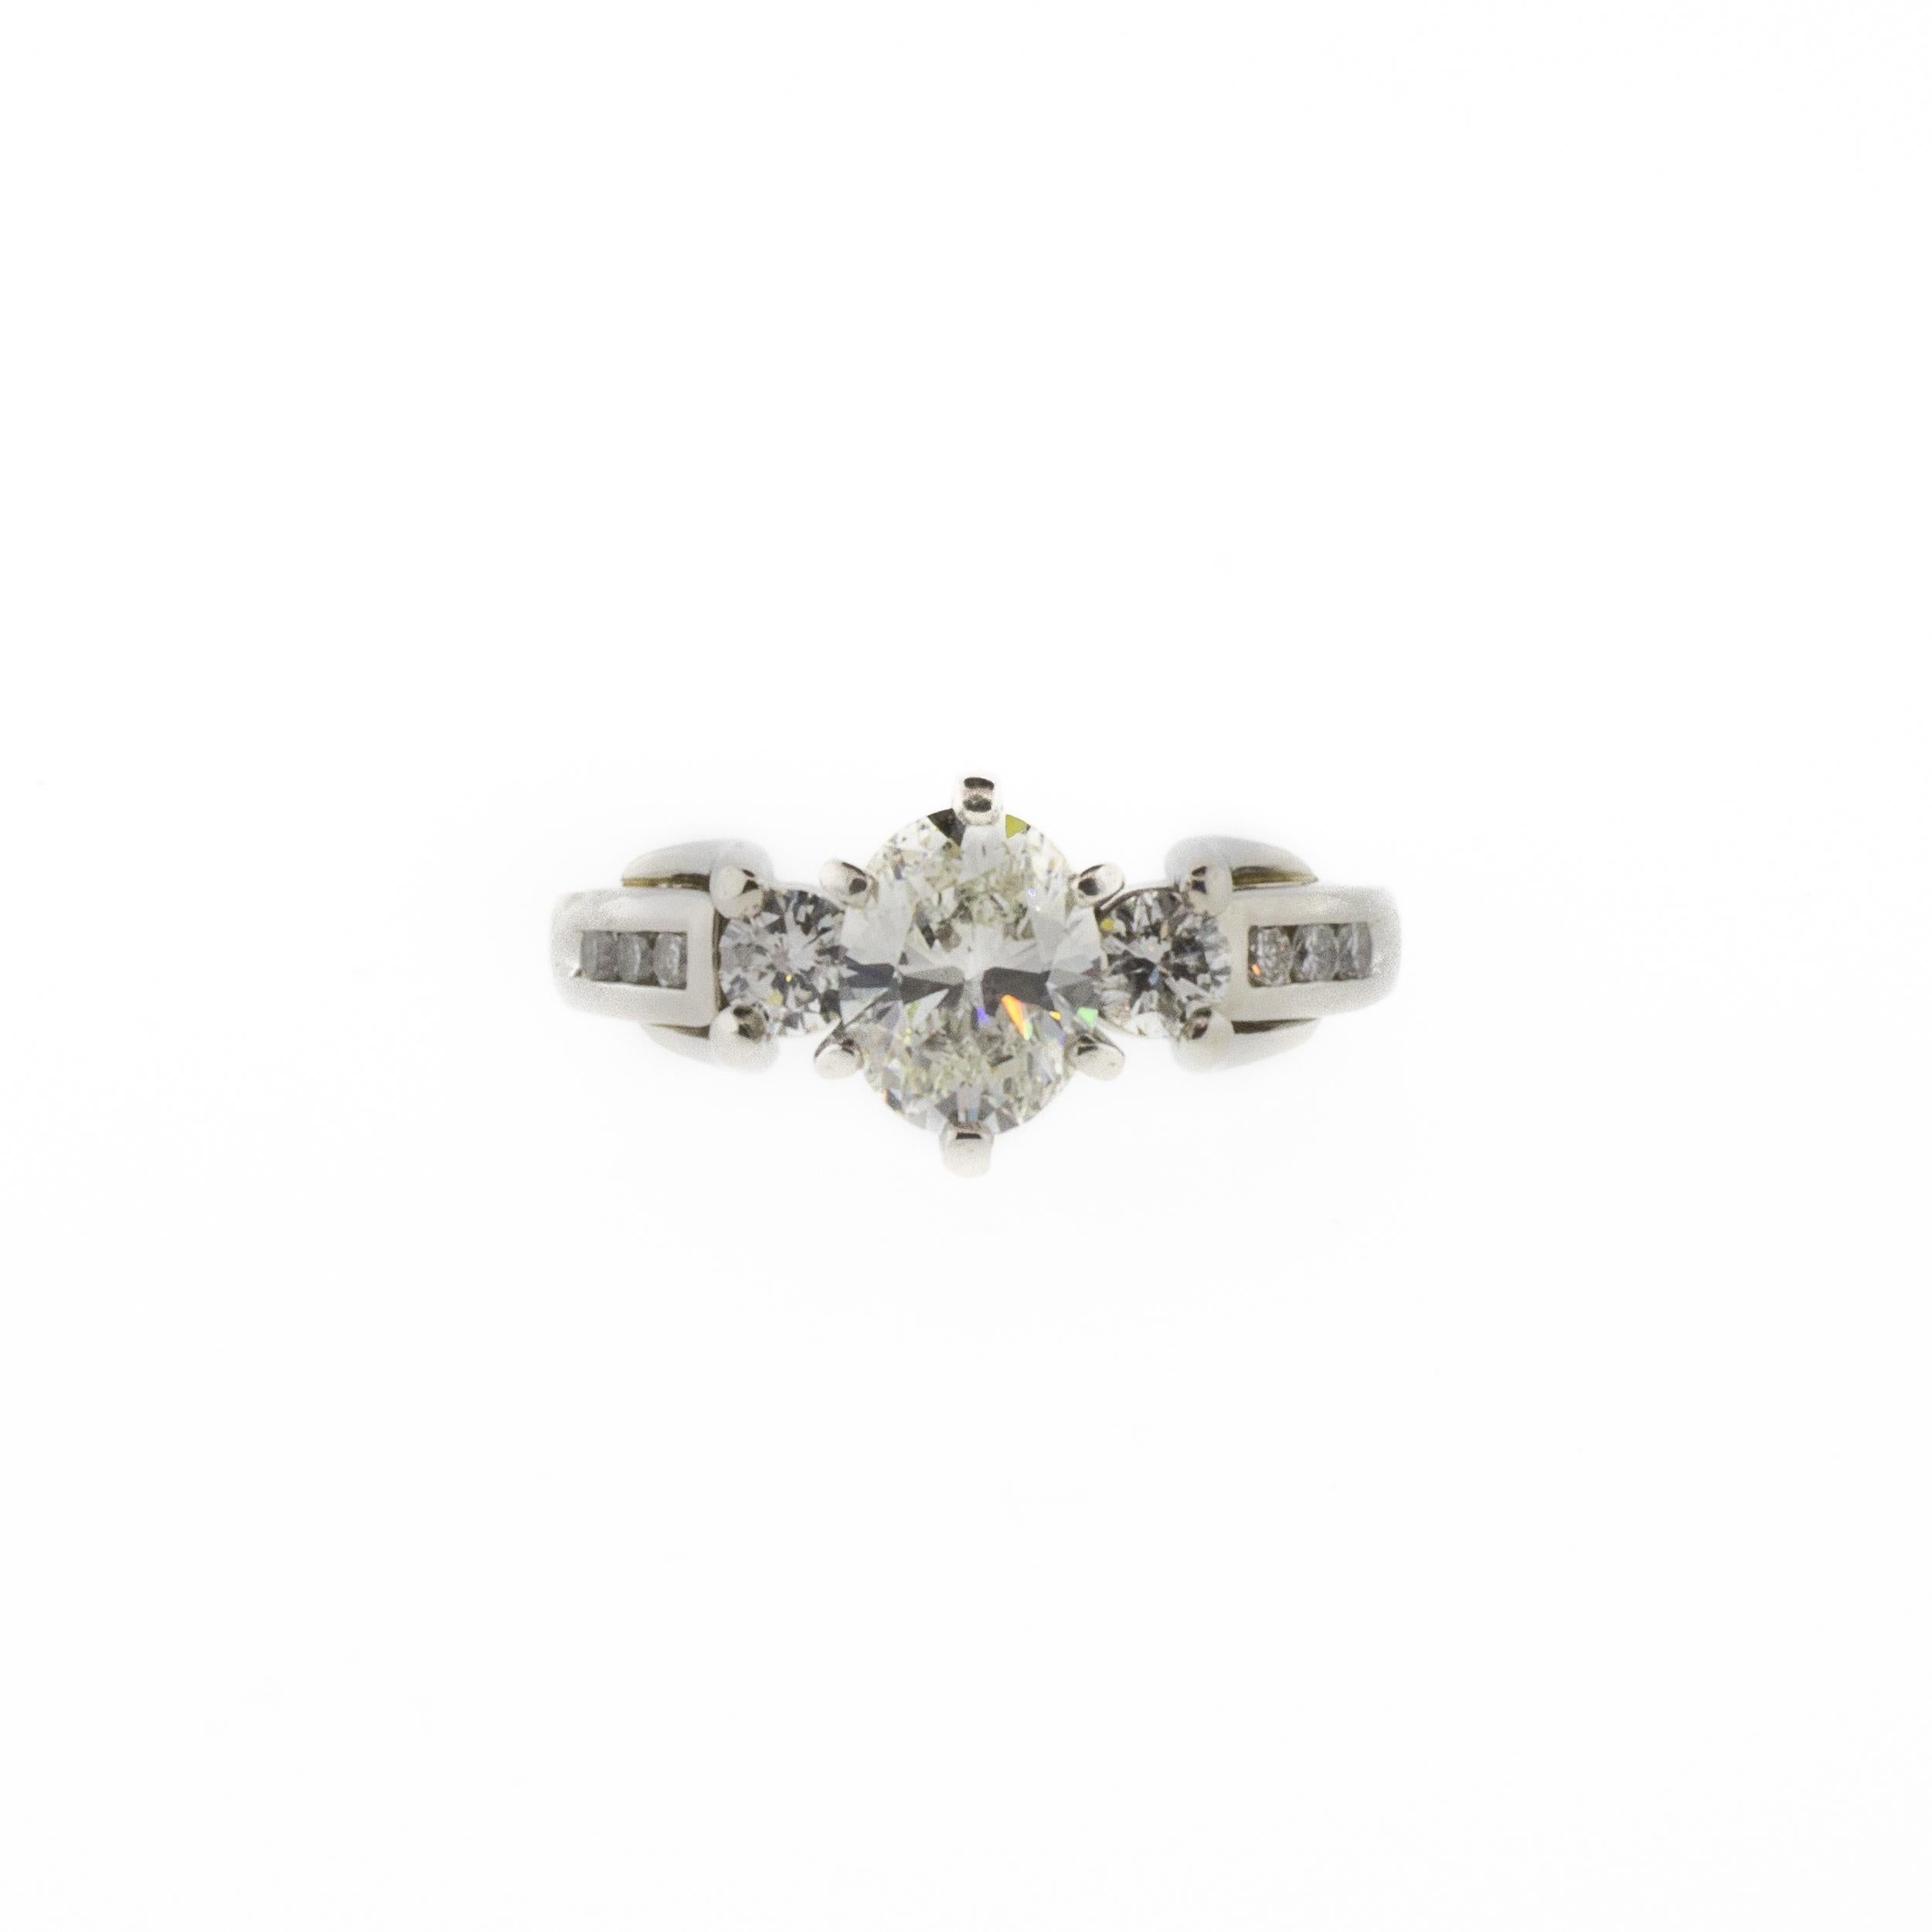 A one-of-a-kind vintage diamond engagement ring with a unique interlocking design detail in dazzling platinum. The main stone is a stunning GIA certified 1.07ct oval brilliant cut H/SI1 natural diamond, surrounded by .39ctw of various sizes of round